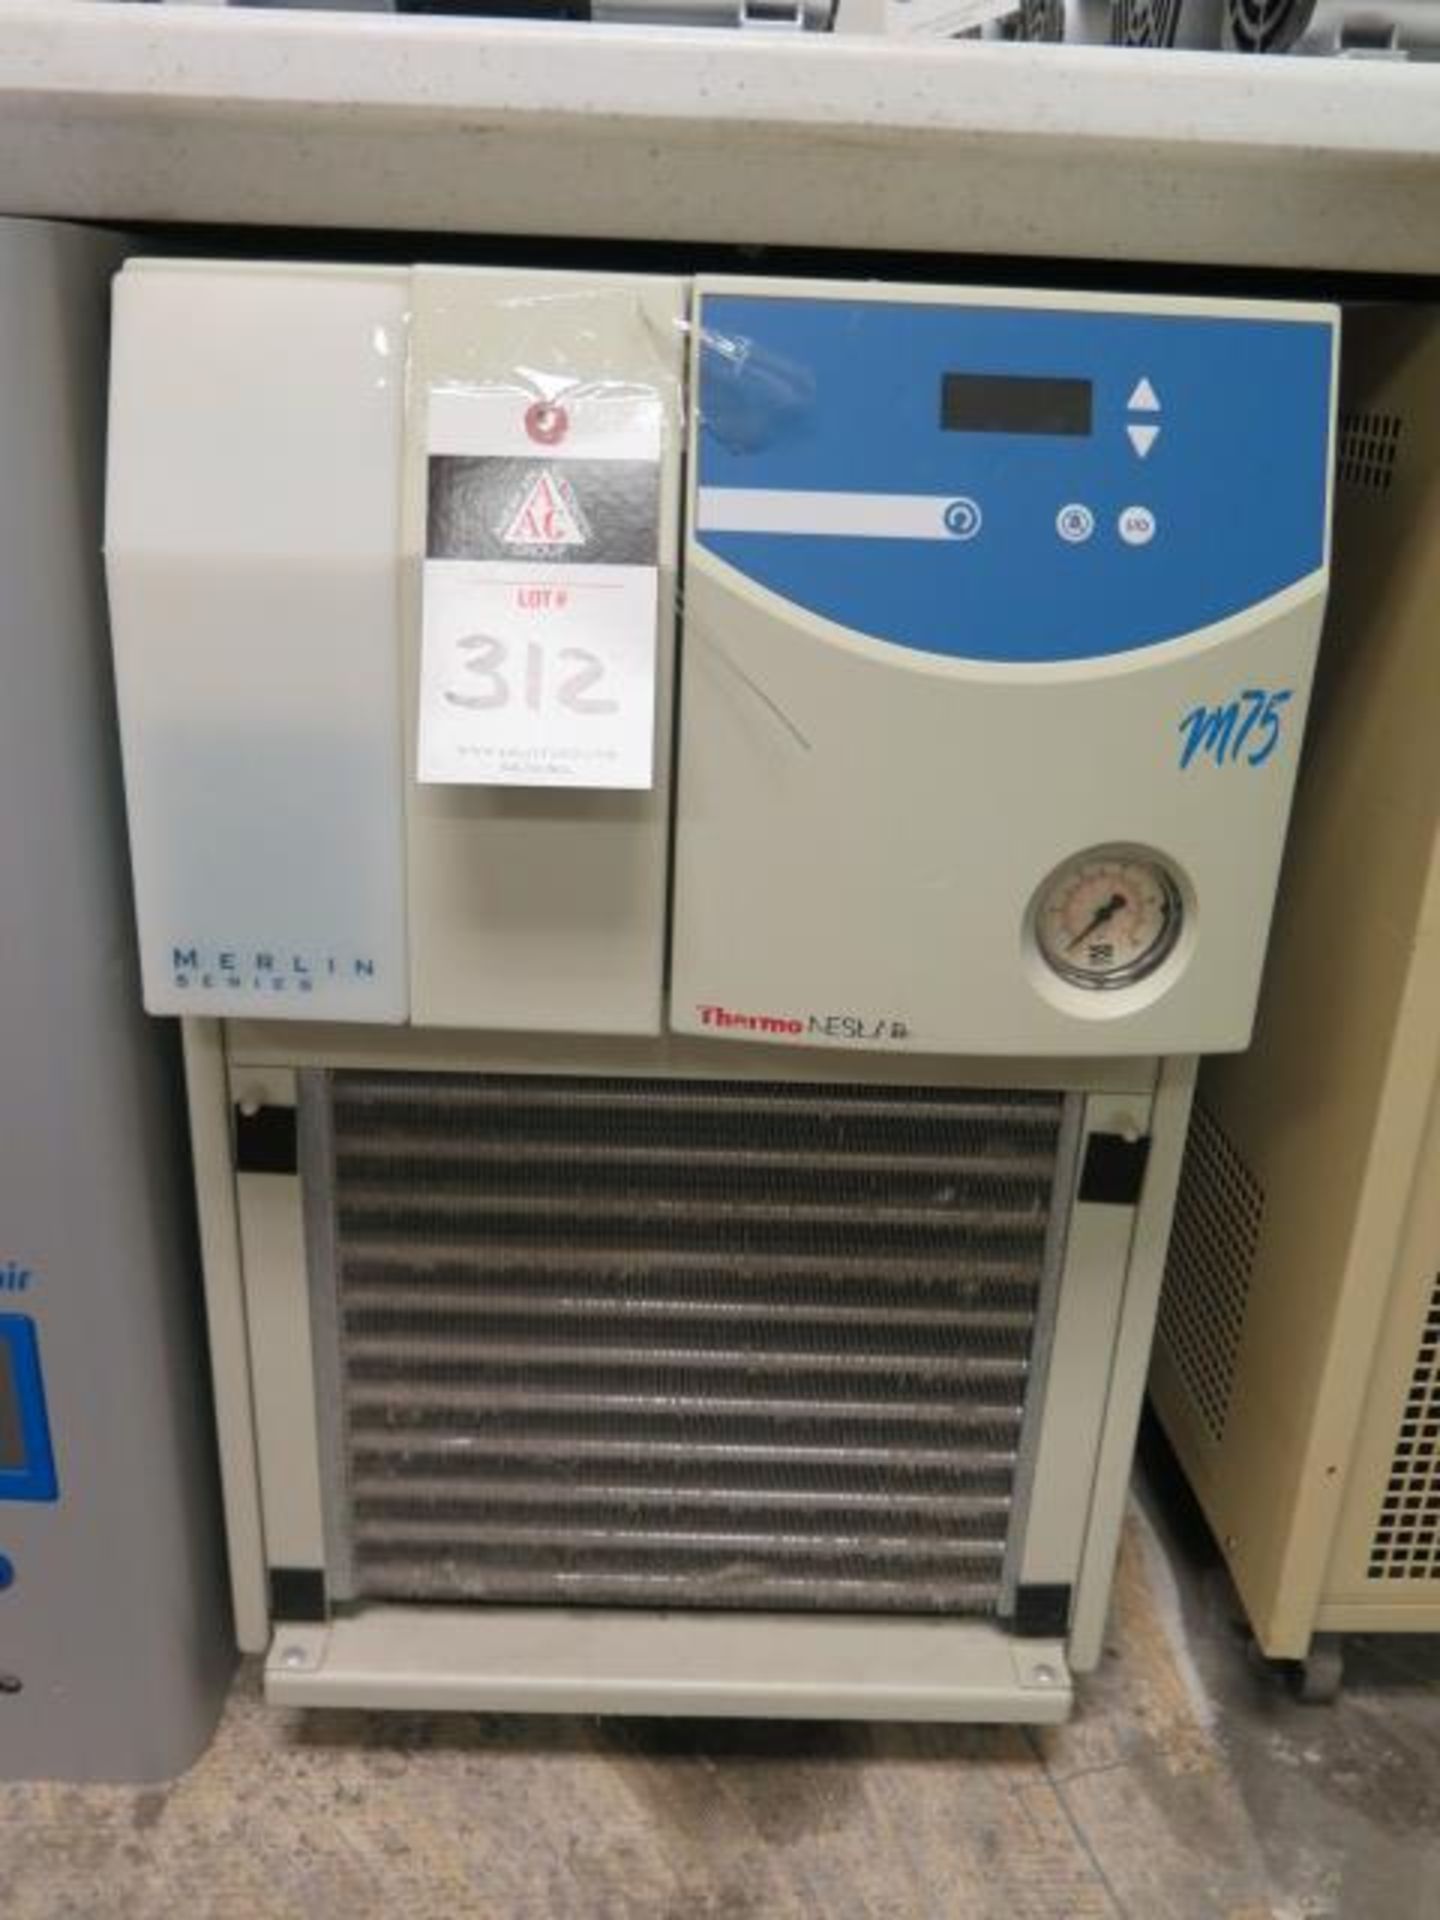 Thermo Neslab Merlin Series M75 Chiller Unit (SOLD AS-IS - NO WARRANTY)